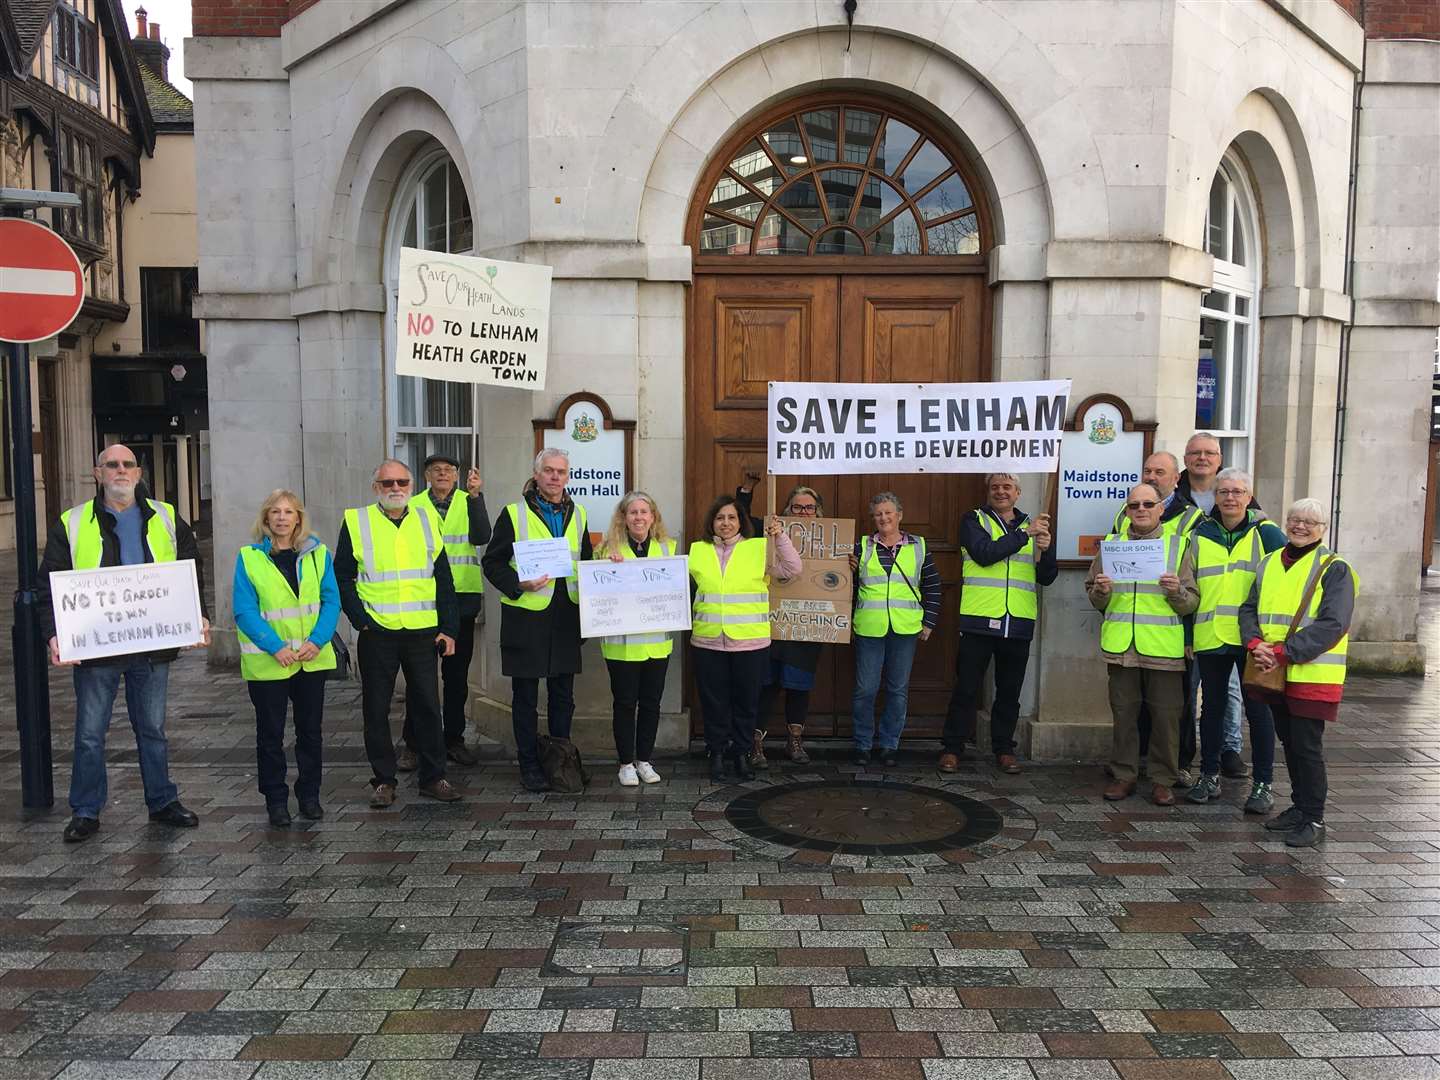 Campaigners opposed to the proposed Lenham garden town at Maidstone Town Hall